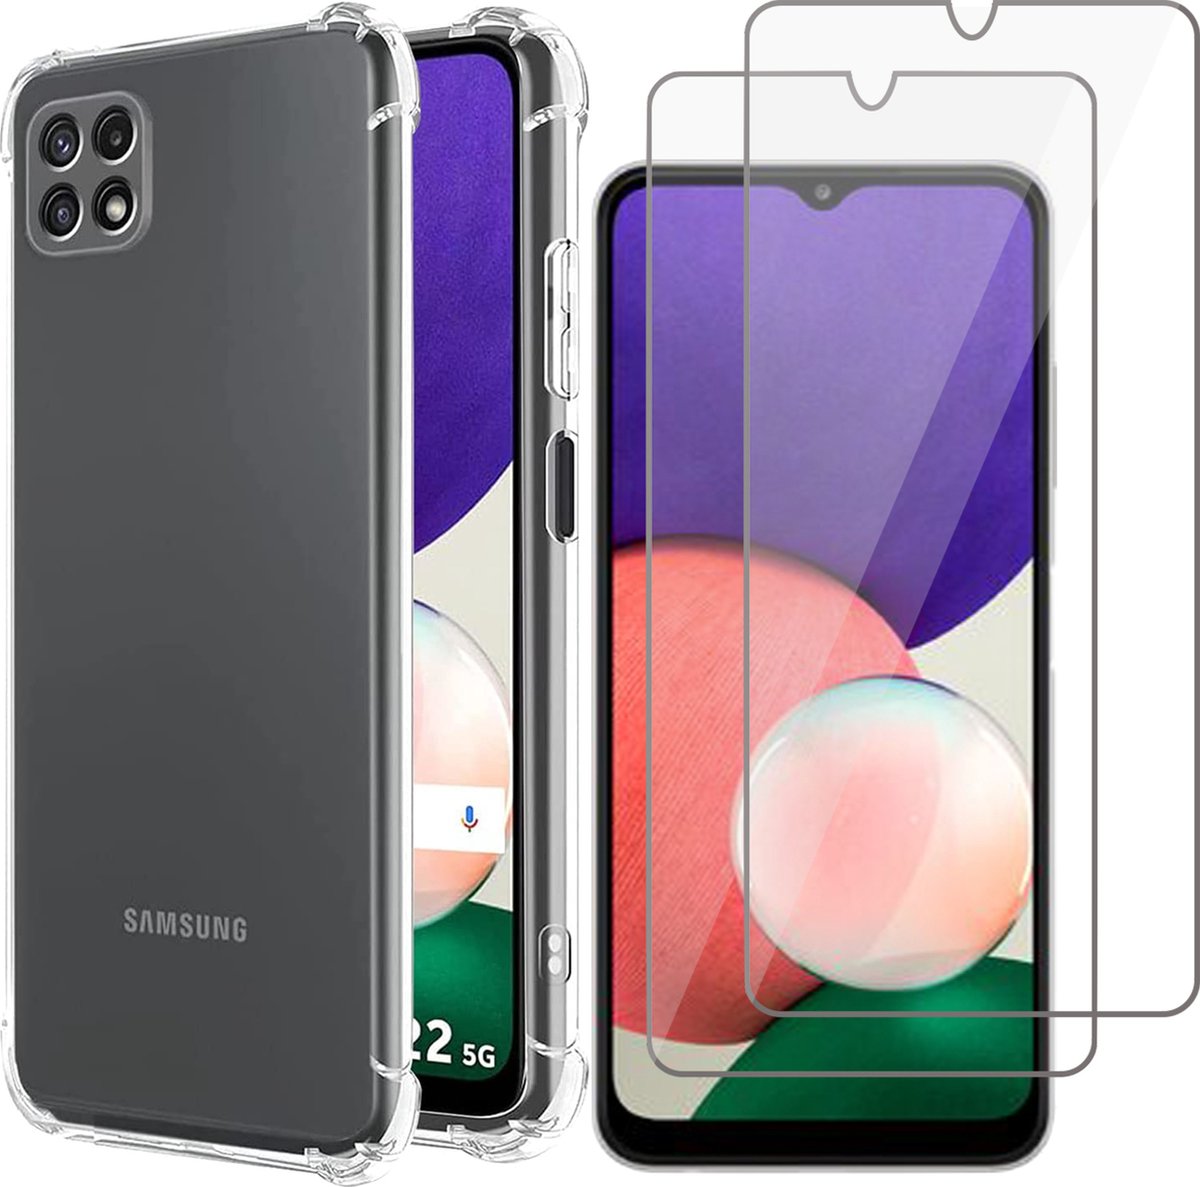 Hoesje geschikt voor Samsung Galaxy A22 5G Back Cover Anti Shock Siliconen Case Transparant Hoes - 2x Screenprotector Gehard Glas Beschermglas Tempered Glass Screen Protector